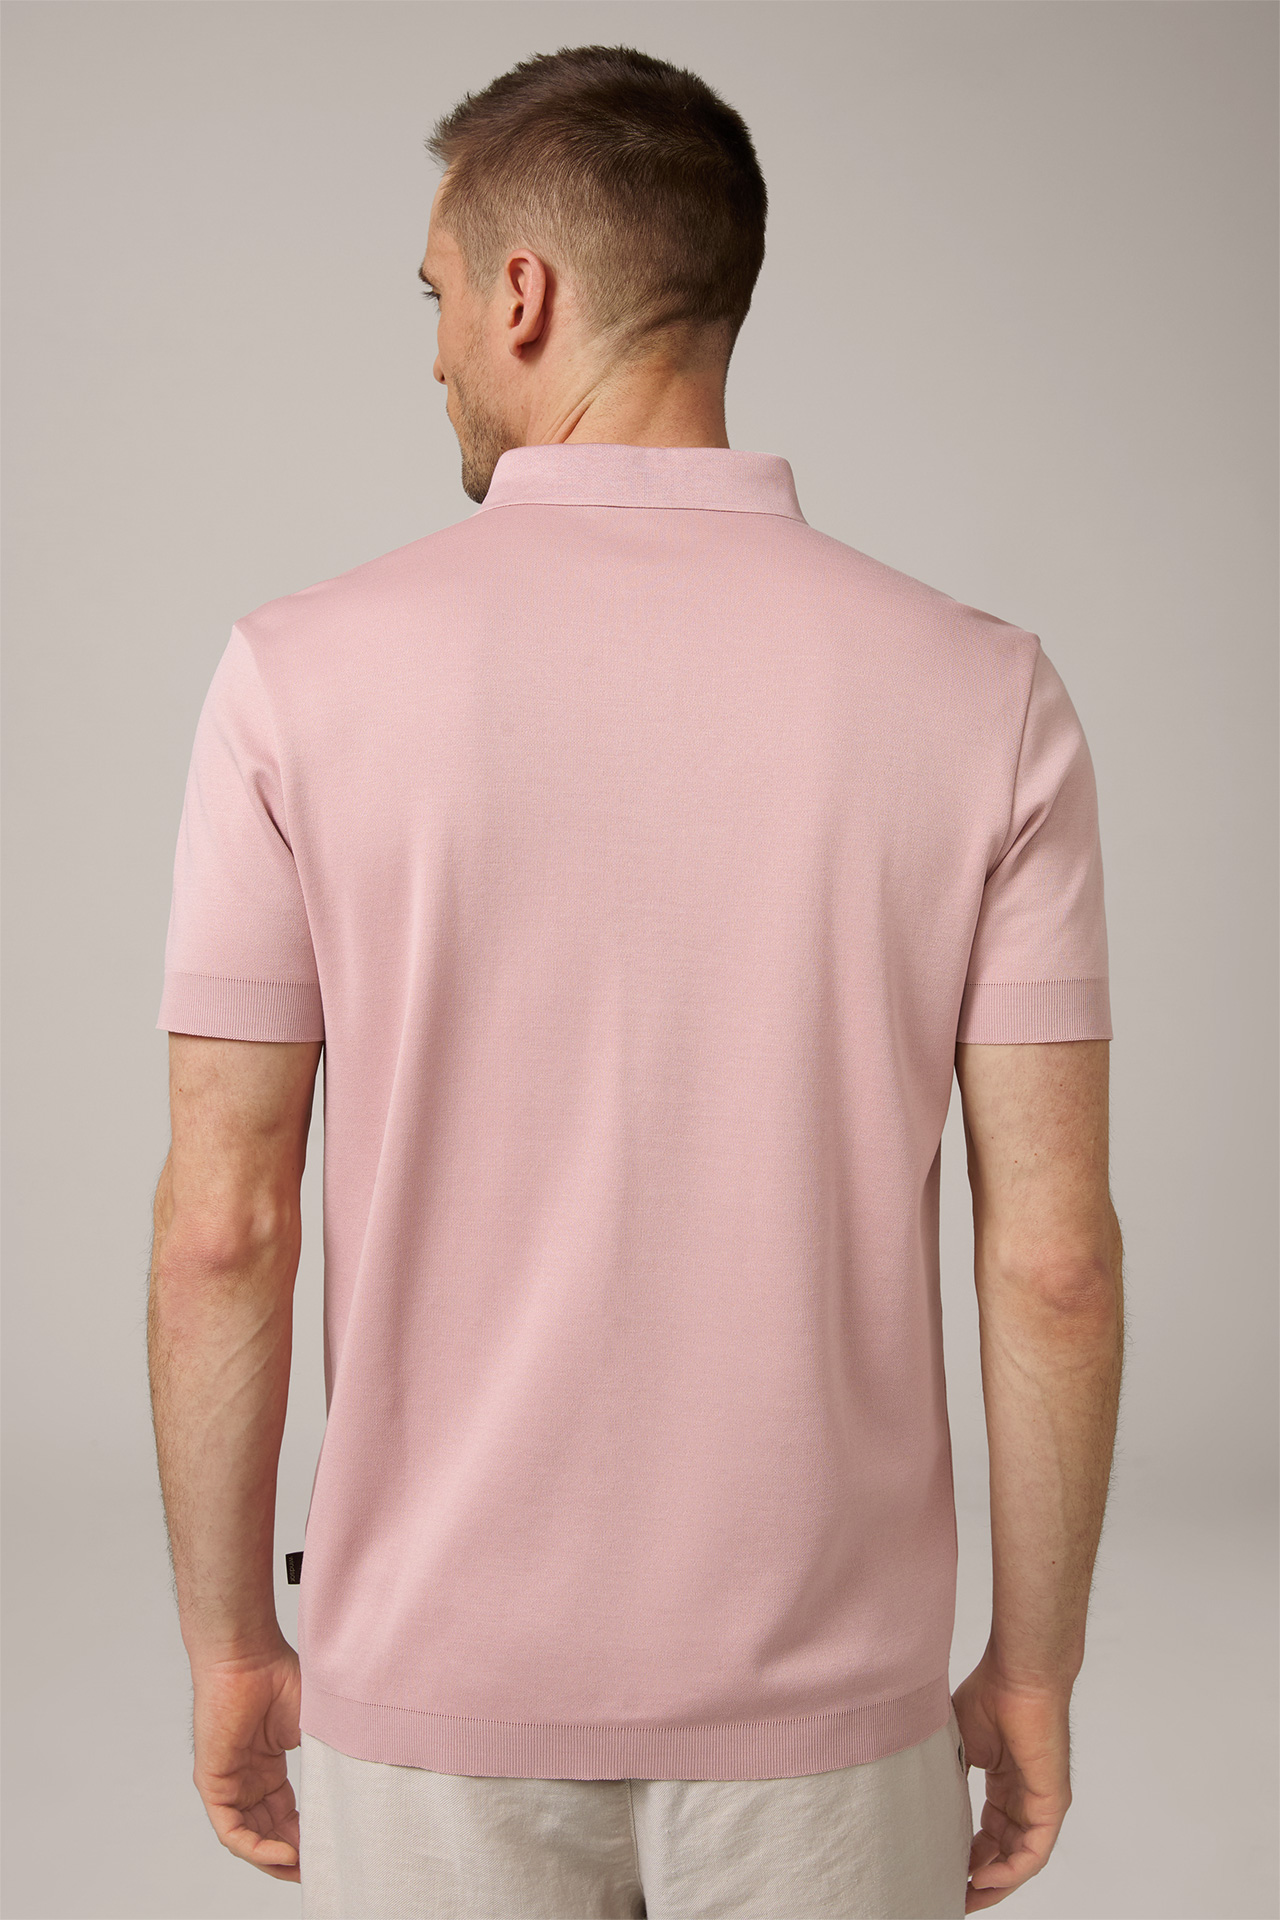 Floro Cotton Polo Shirt in Dusky Pink